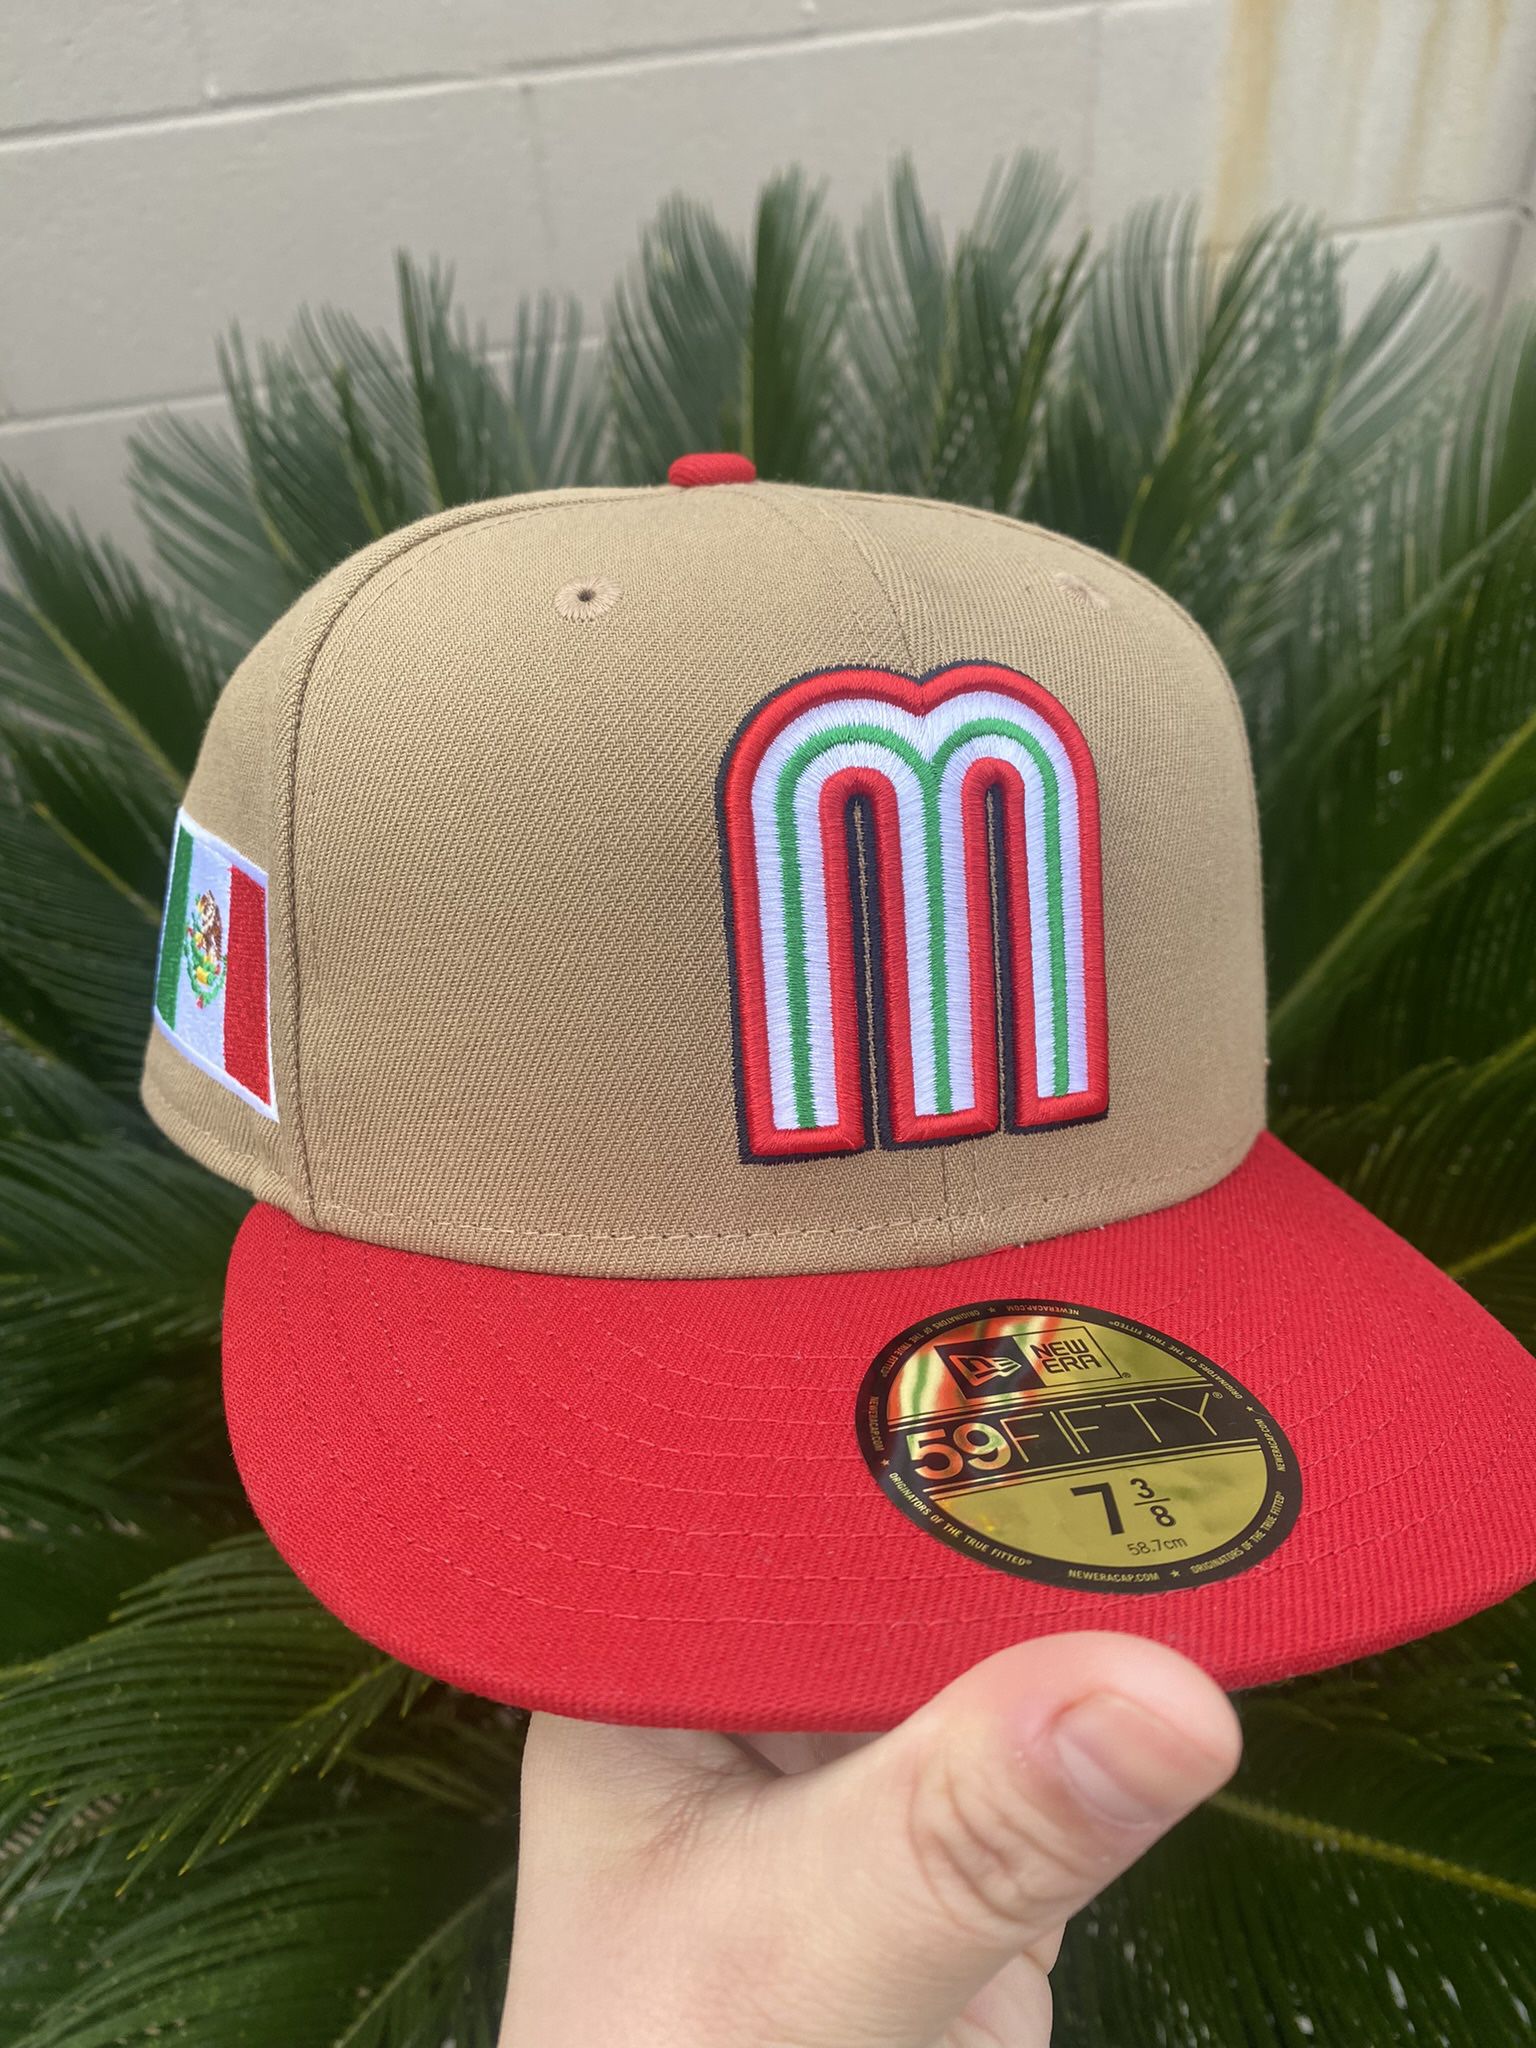 WBC Mexico Khaki Tan Red New Era Fitted Hat Size 7 3/8